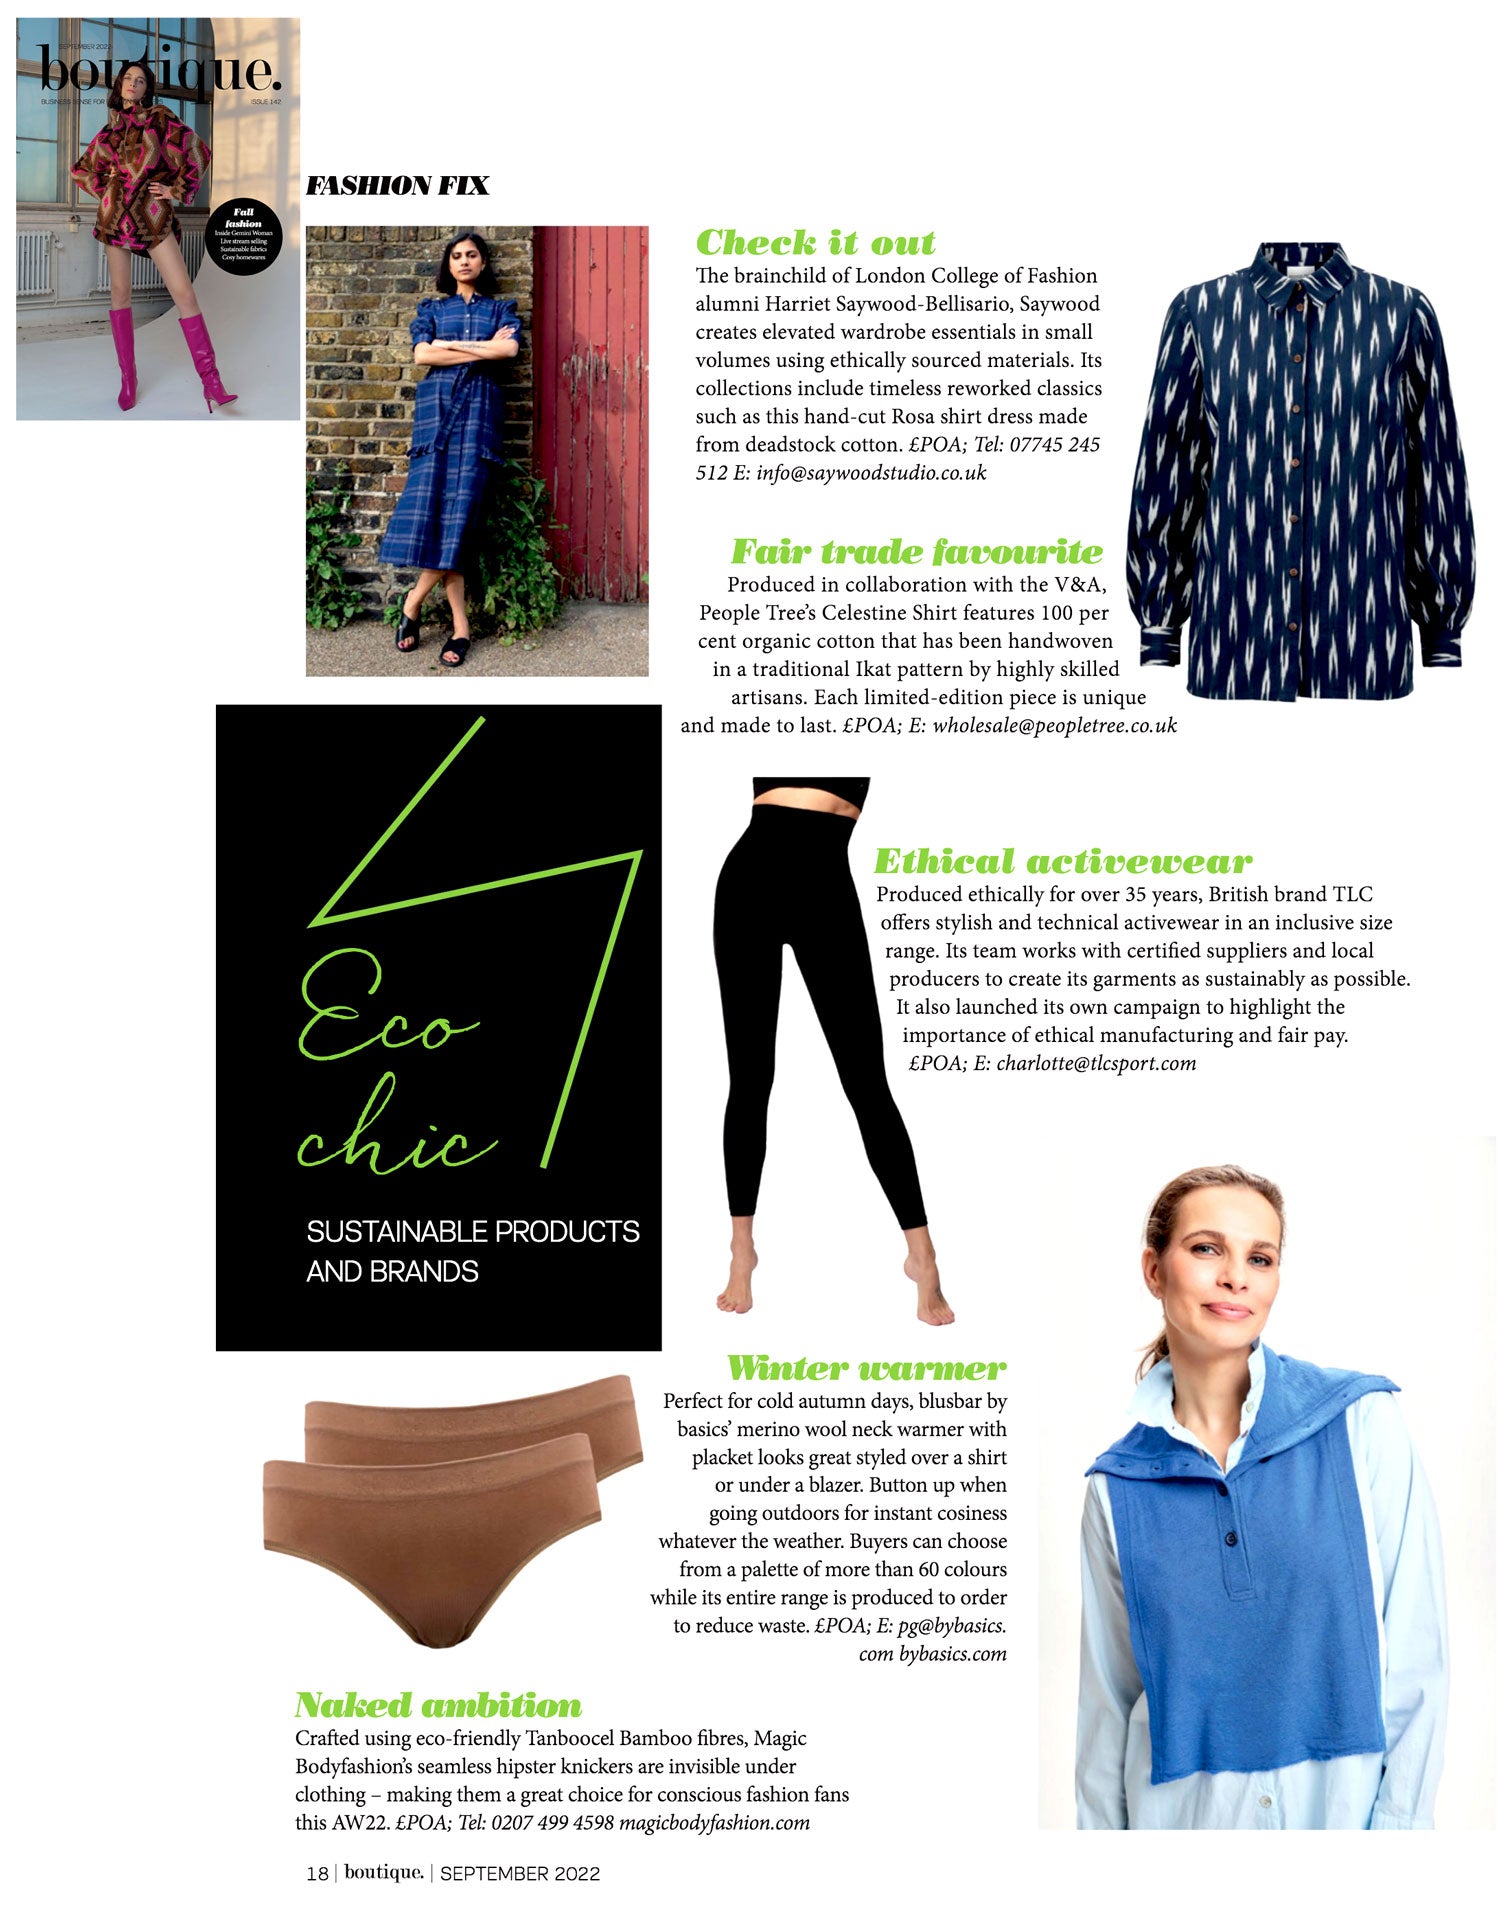 Boutique Magazine page featuring Saywood's navy check deadstock cotton Rosa Puff Sleeve Dress